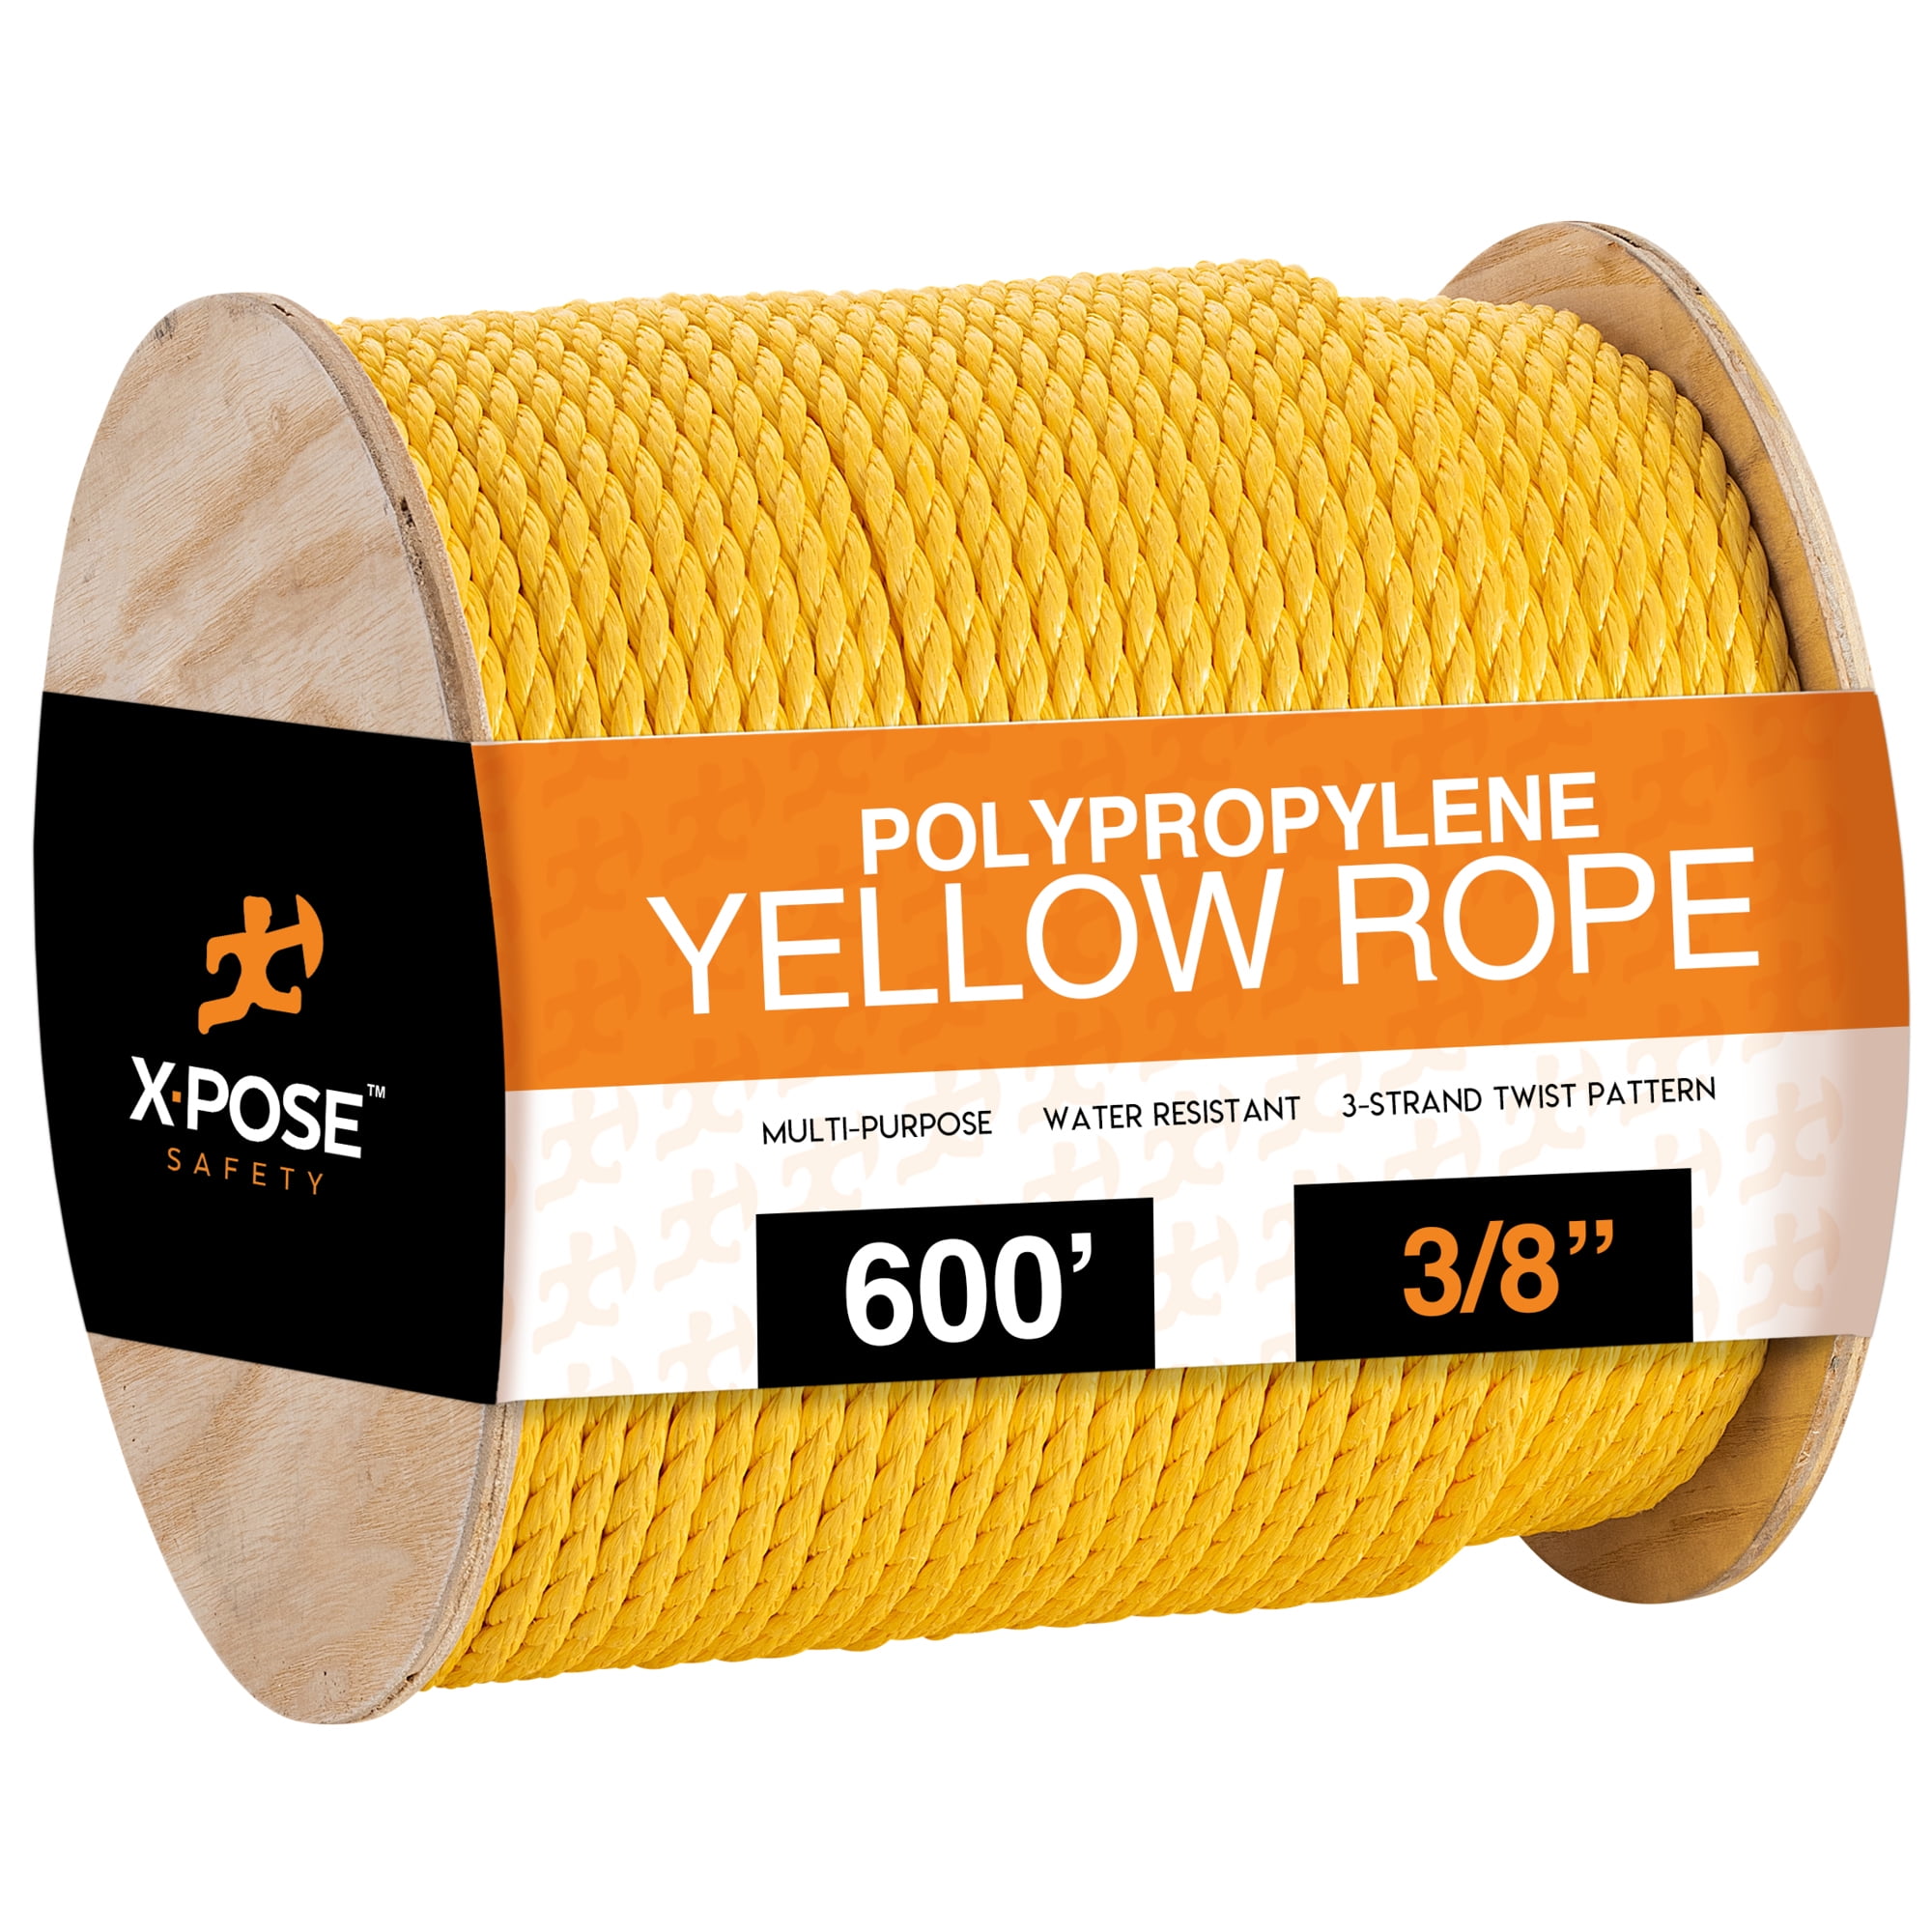 600 ft Twisted Polypropylene Rope - 3/4 - Yellow Floating Poly Pro Cord -  Resistant to Oil, Moisture, Rot, Mold, Marine Growth and Chemicals 